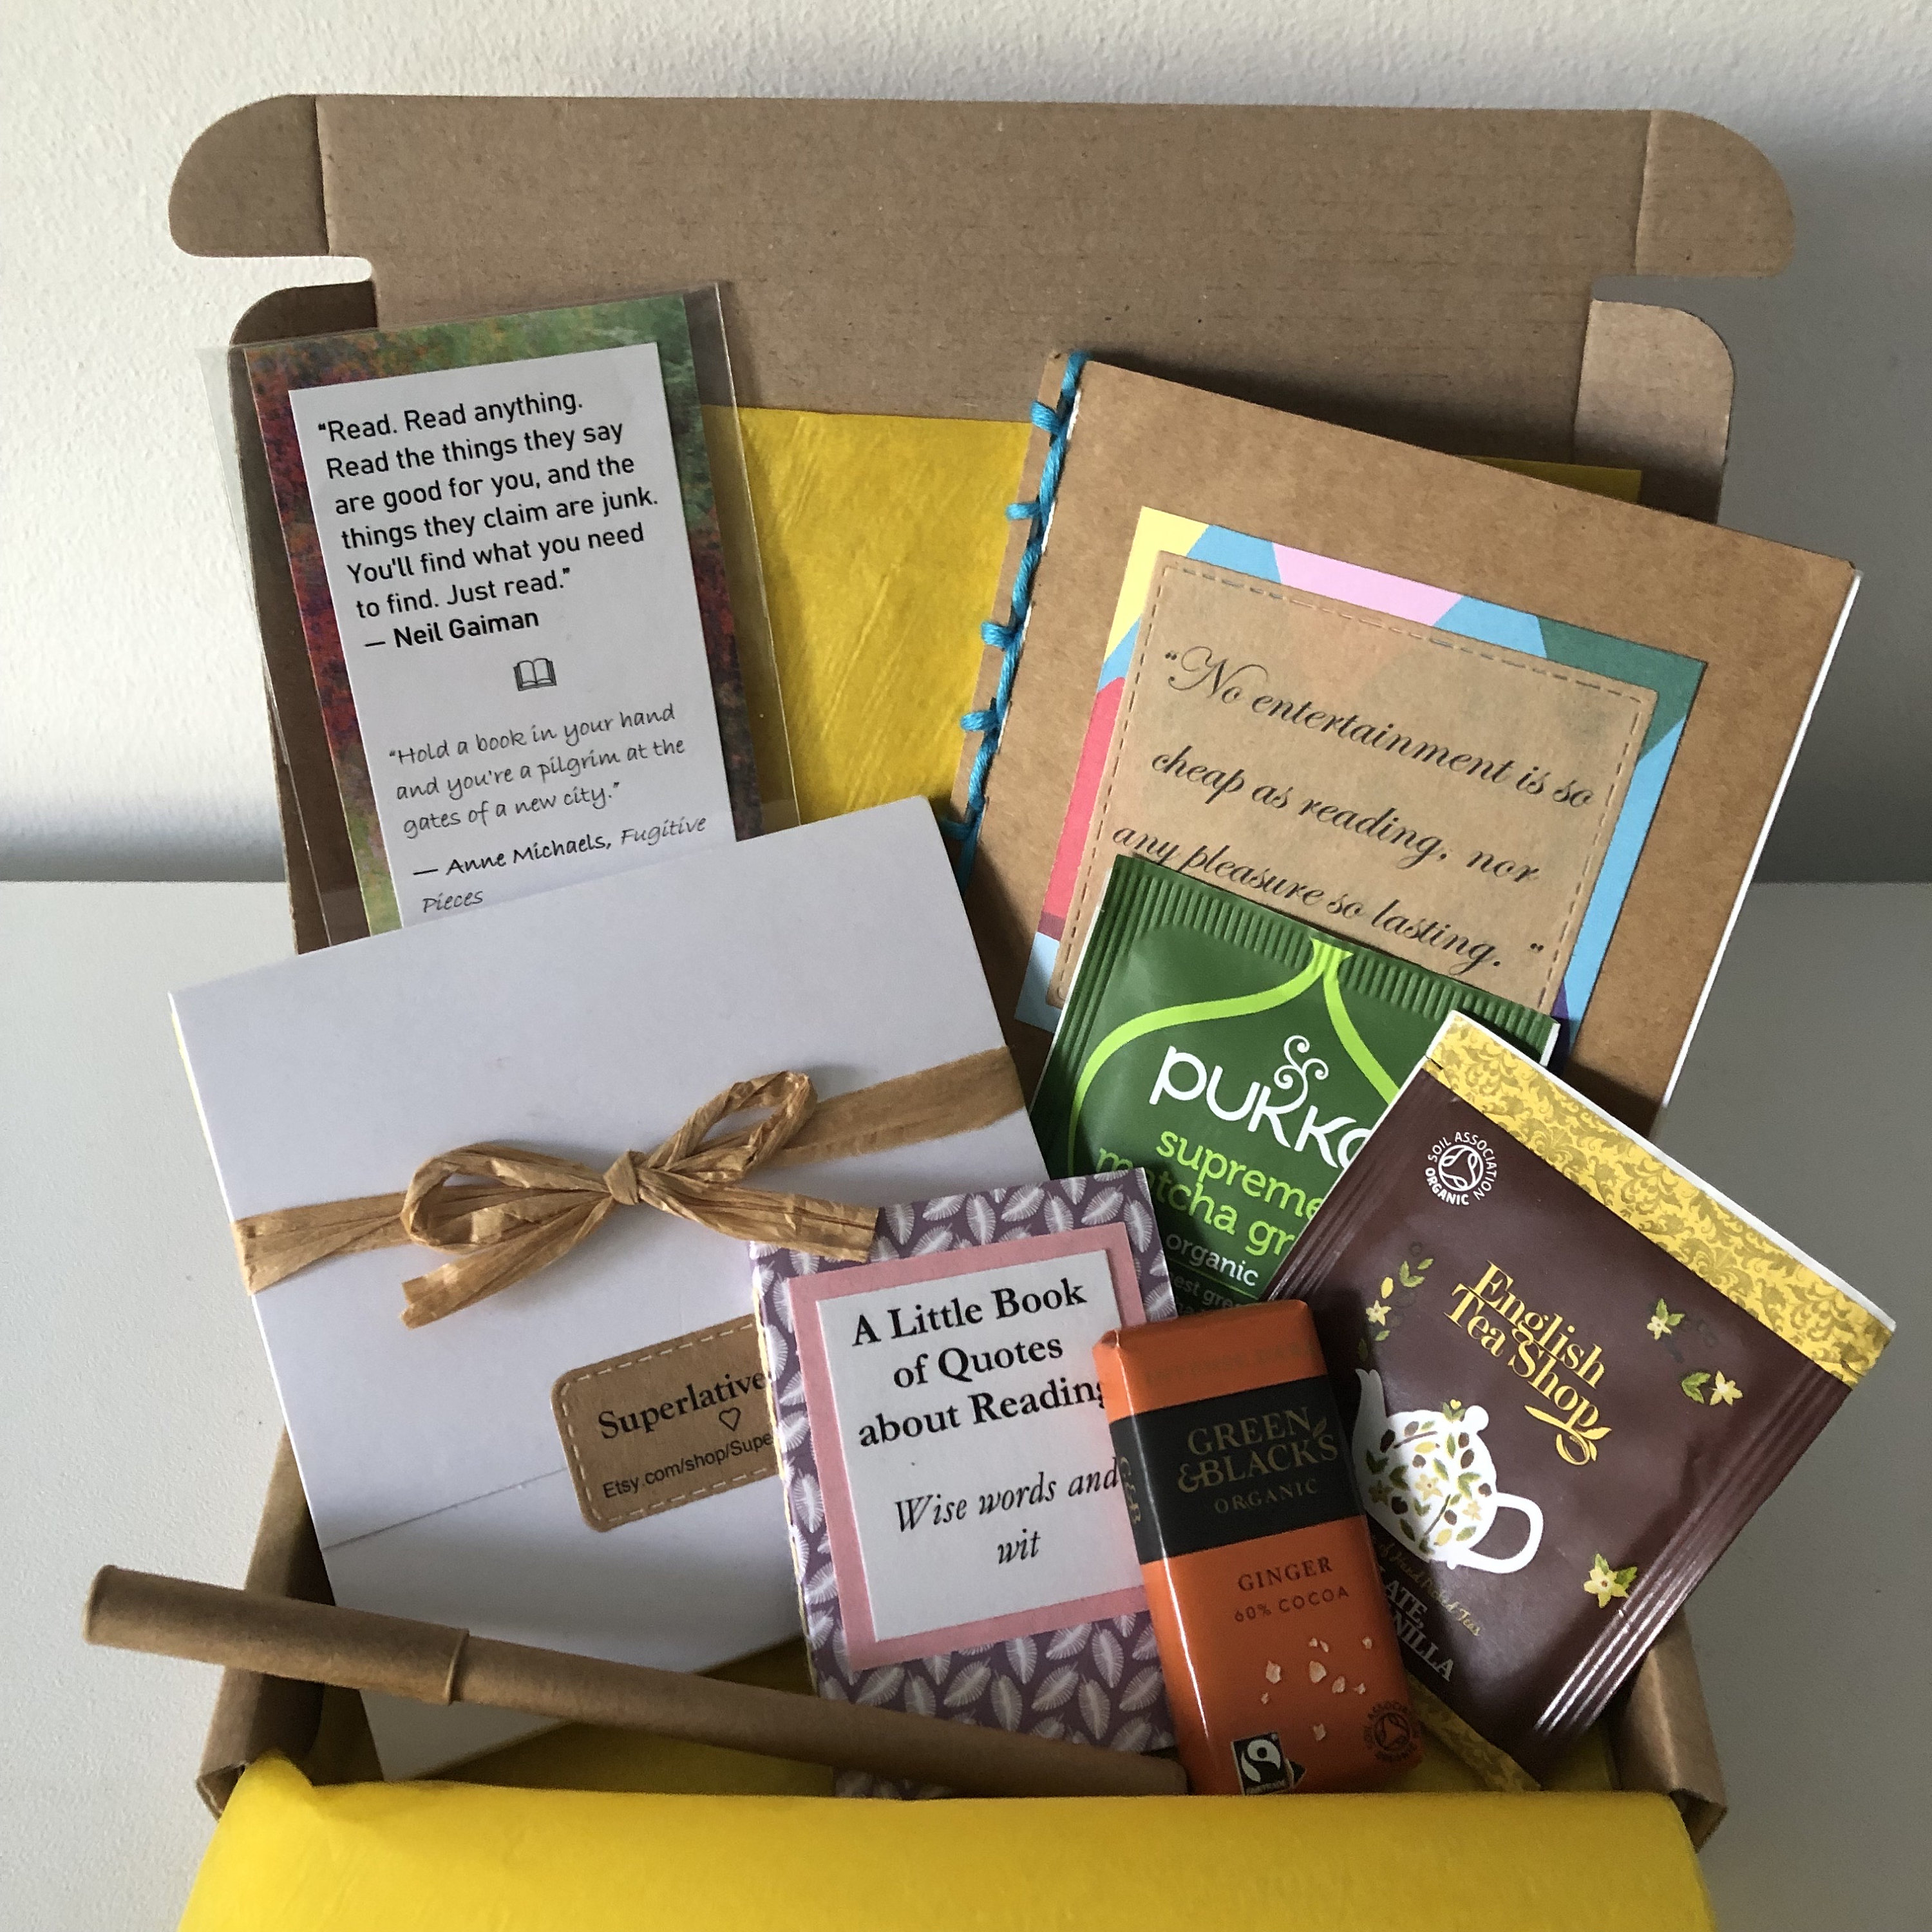 Bookish Relish: The Personal Library Kit - A perfect gift